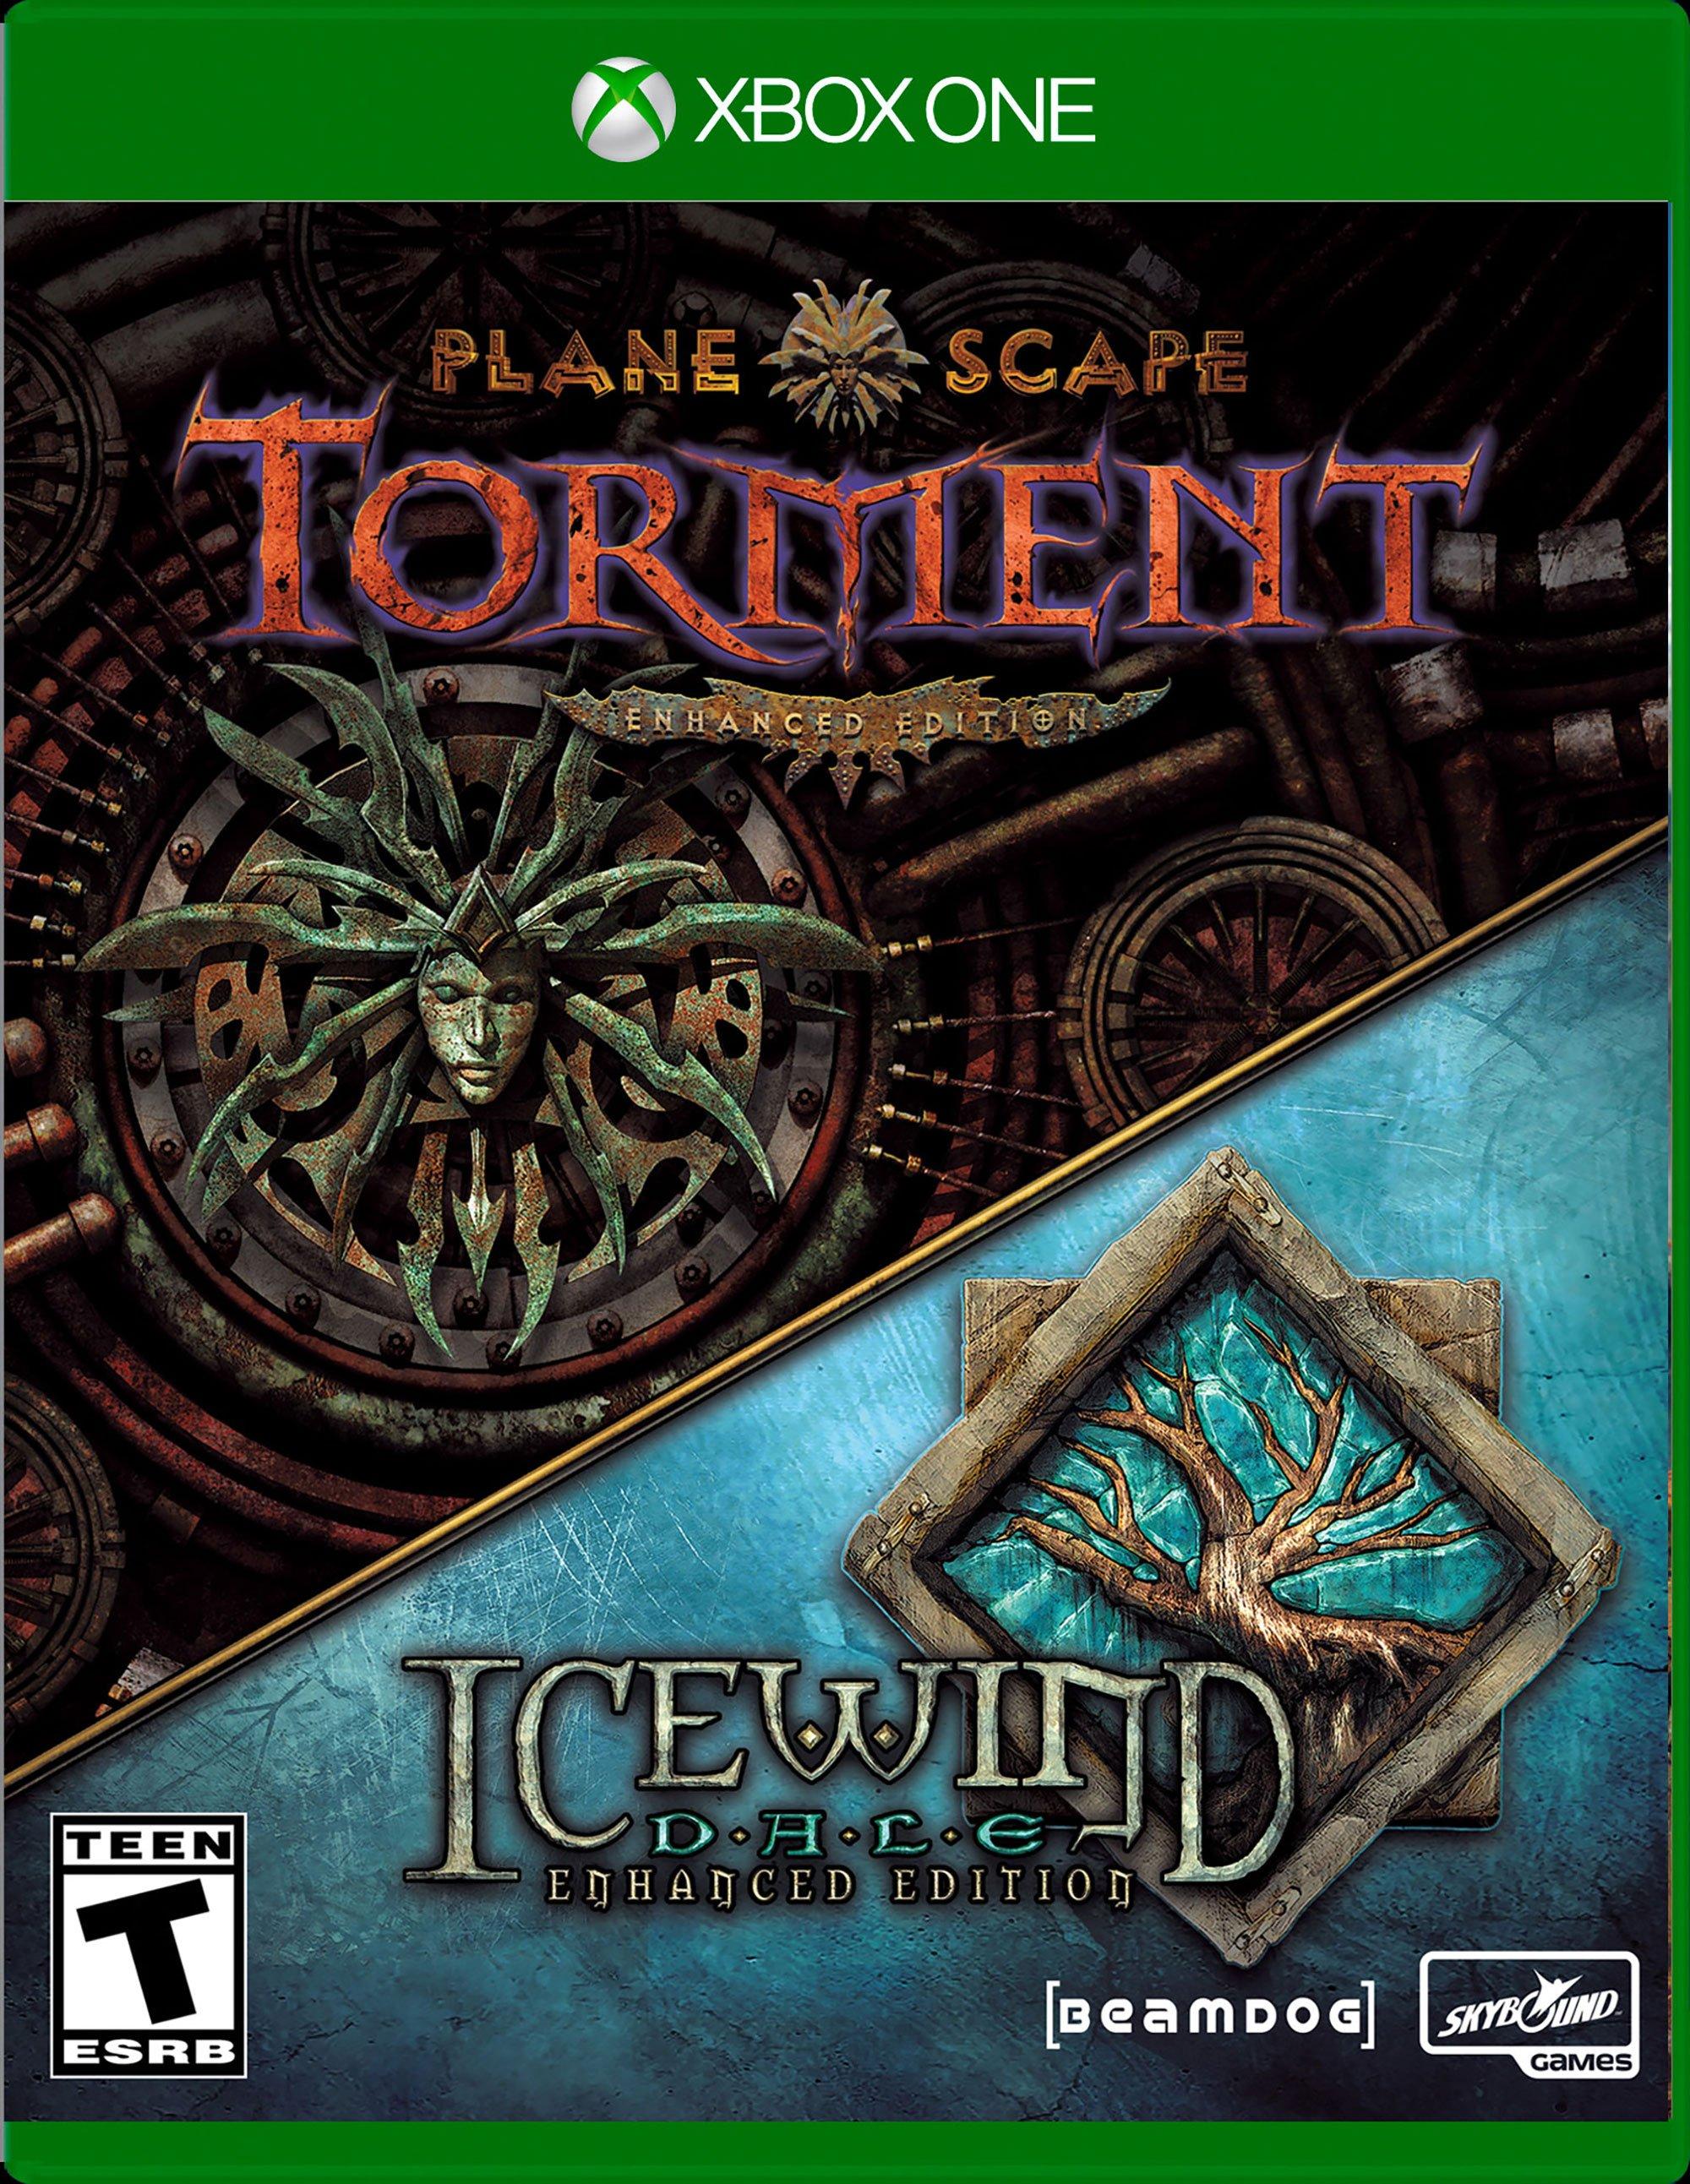 Planescape Torment and | Xbox Edition Xbox One Enhanced - Icewind GameStop One 